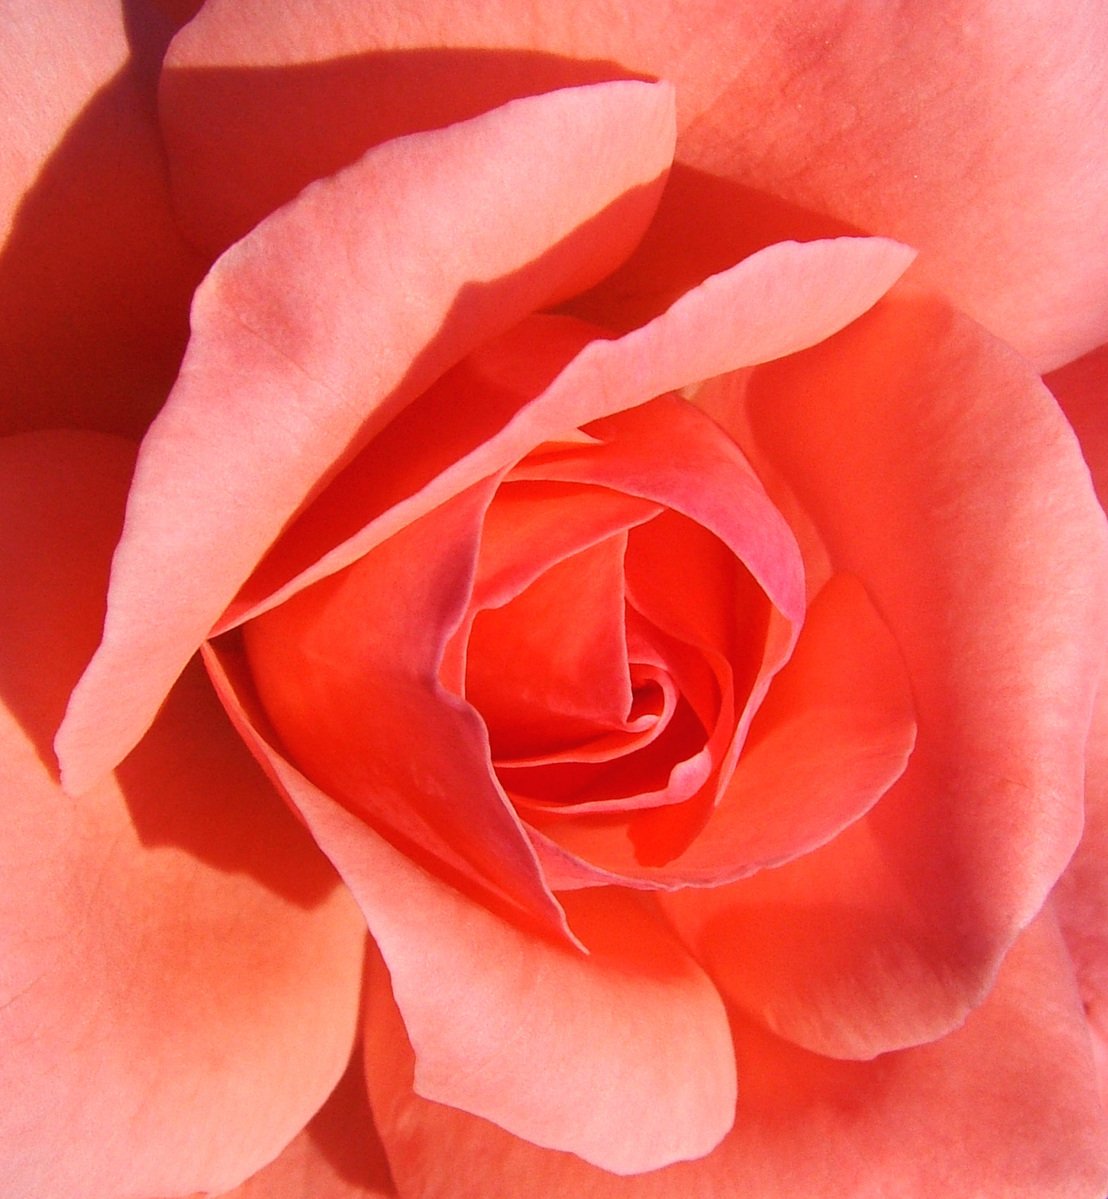 a rose with a center that has been wilted and has pink petals